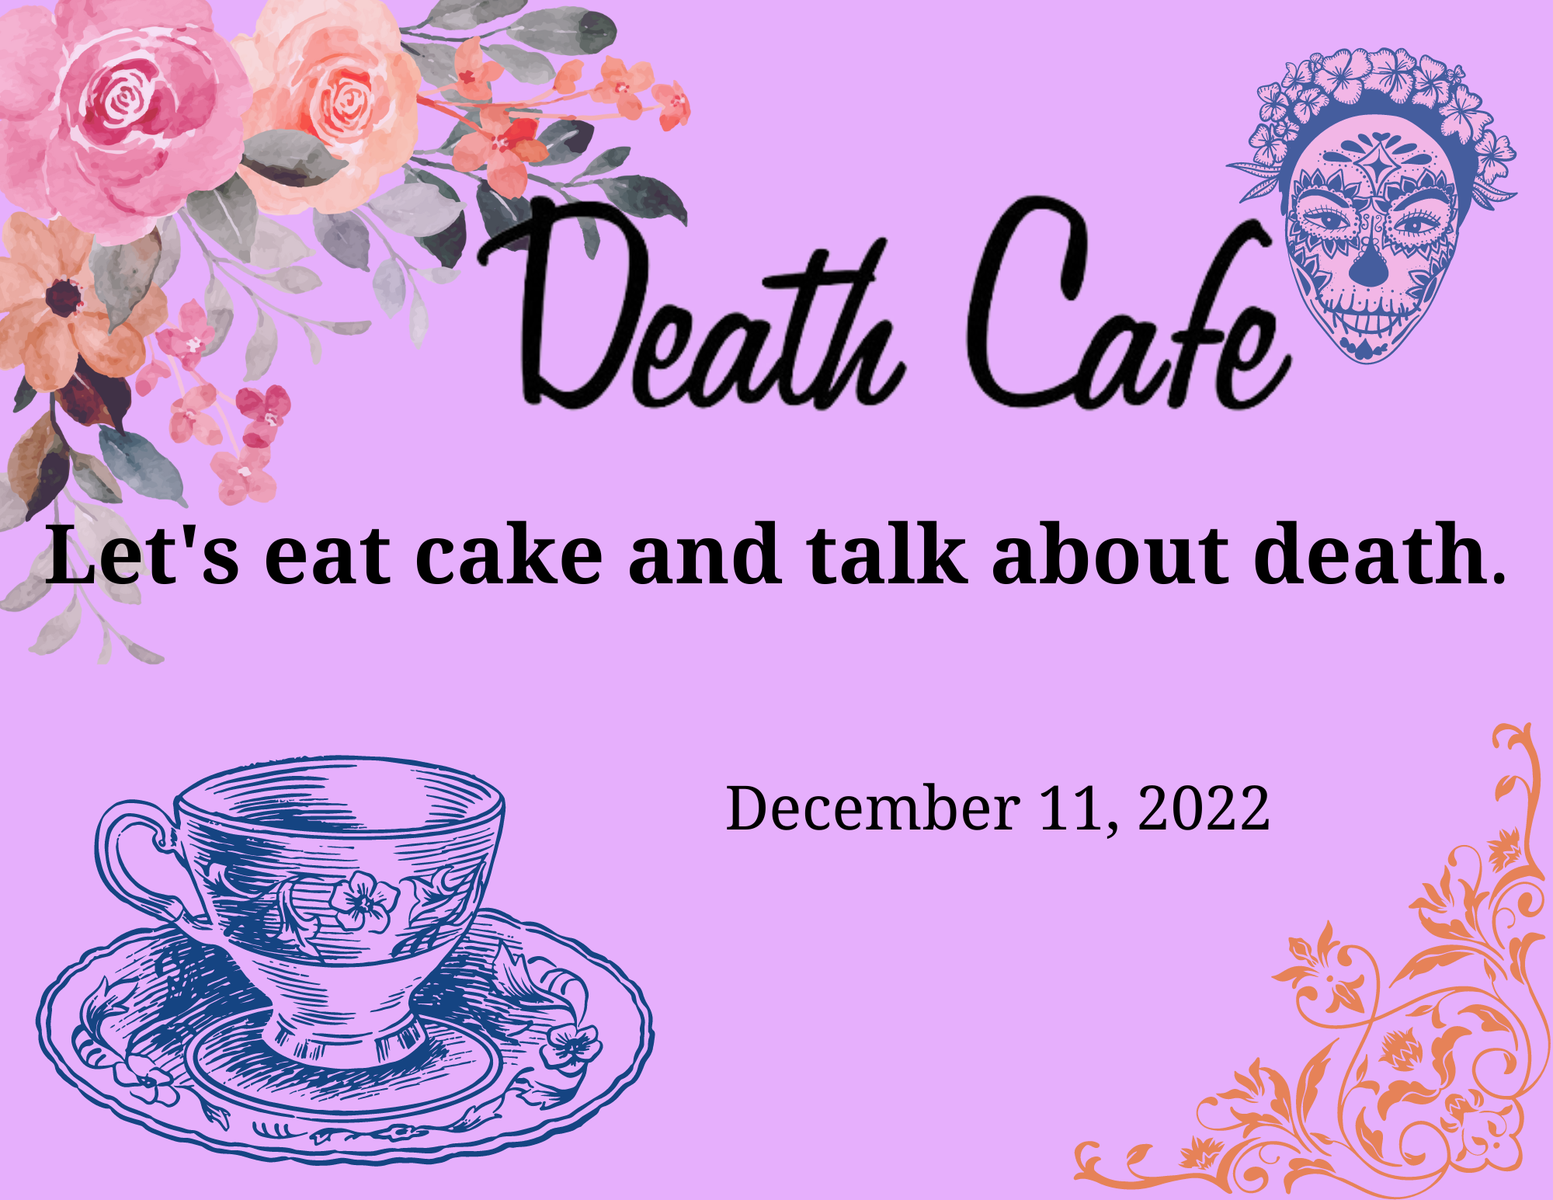 Death Cafe Carbon County PA